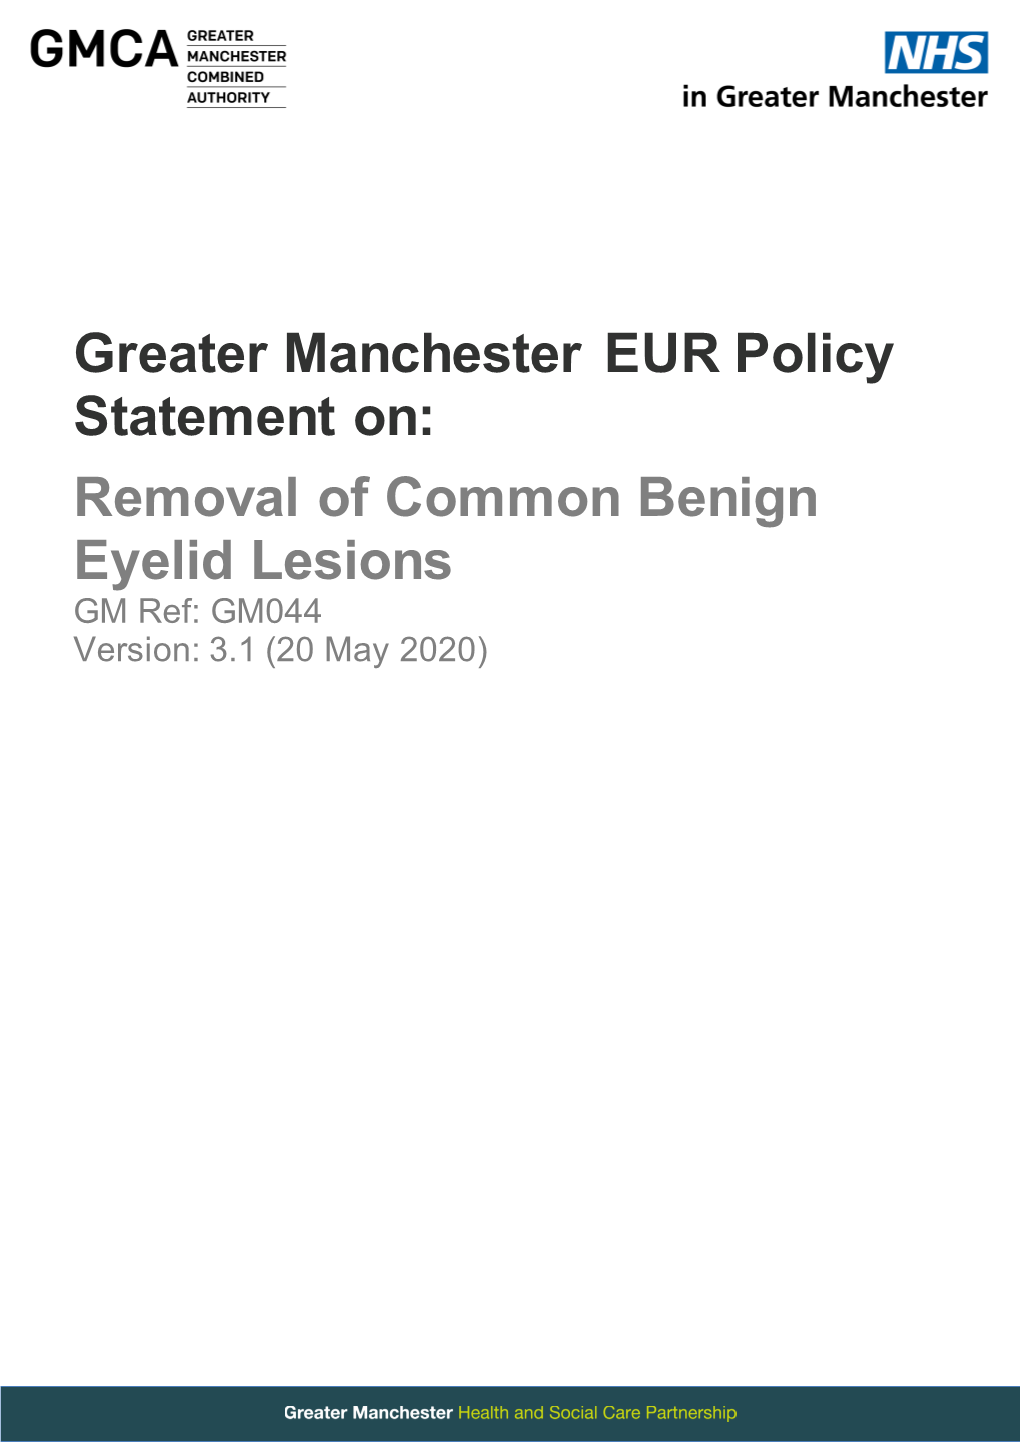 Greater Manchester EUR Policy Statement On: Removal of Common Benign Eyelid Lesions GM Ref: GM044 Version: 3.1 (20 May 2020)